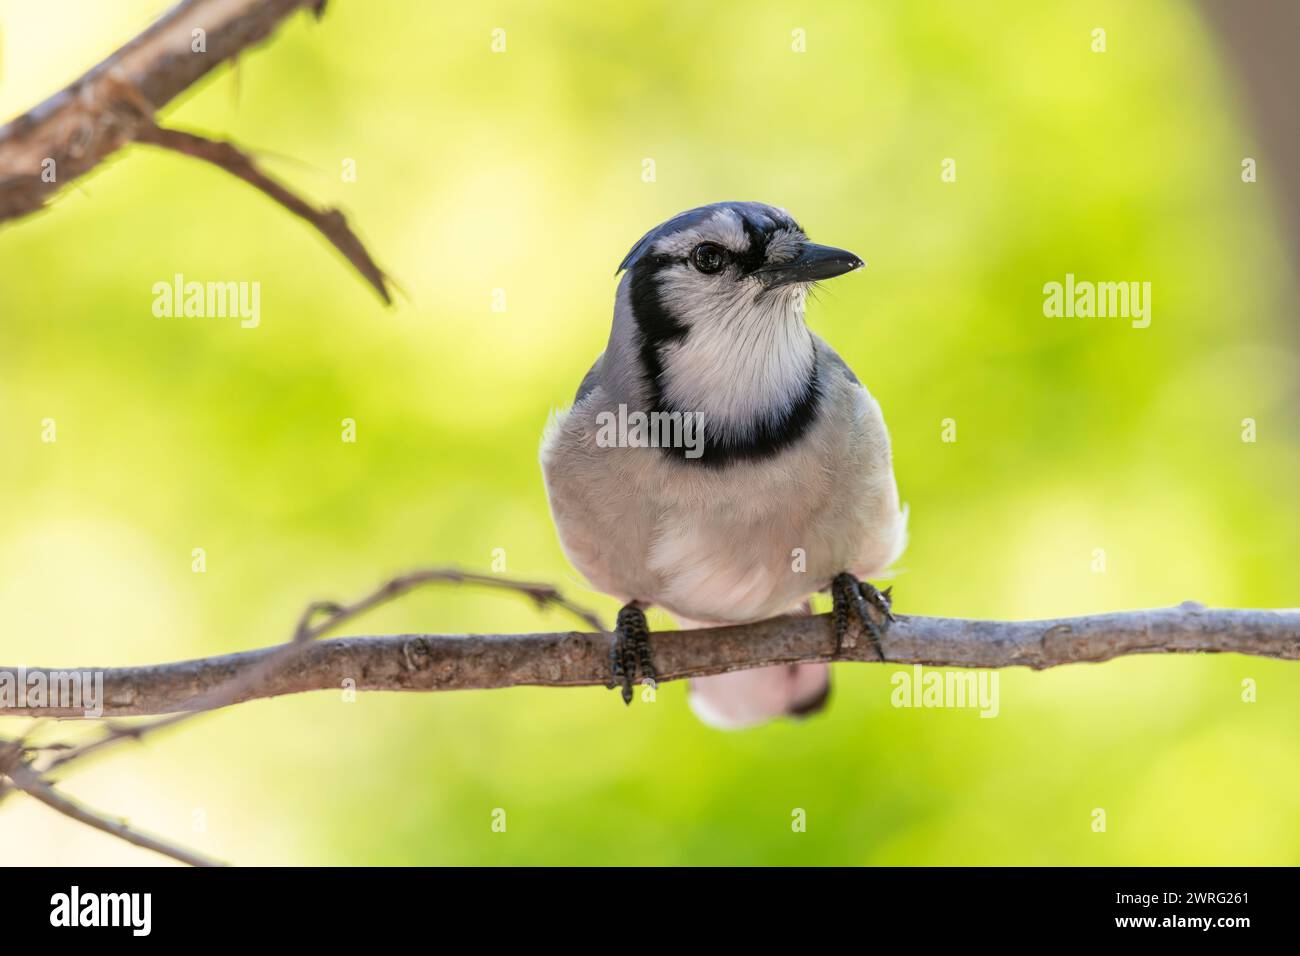 Blue jay perched on a tree branch, Brownsburg-Chatham, Quebec, Canada Stock Photo